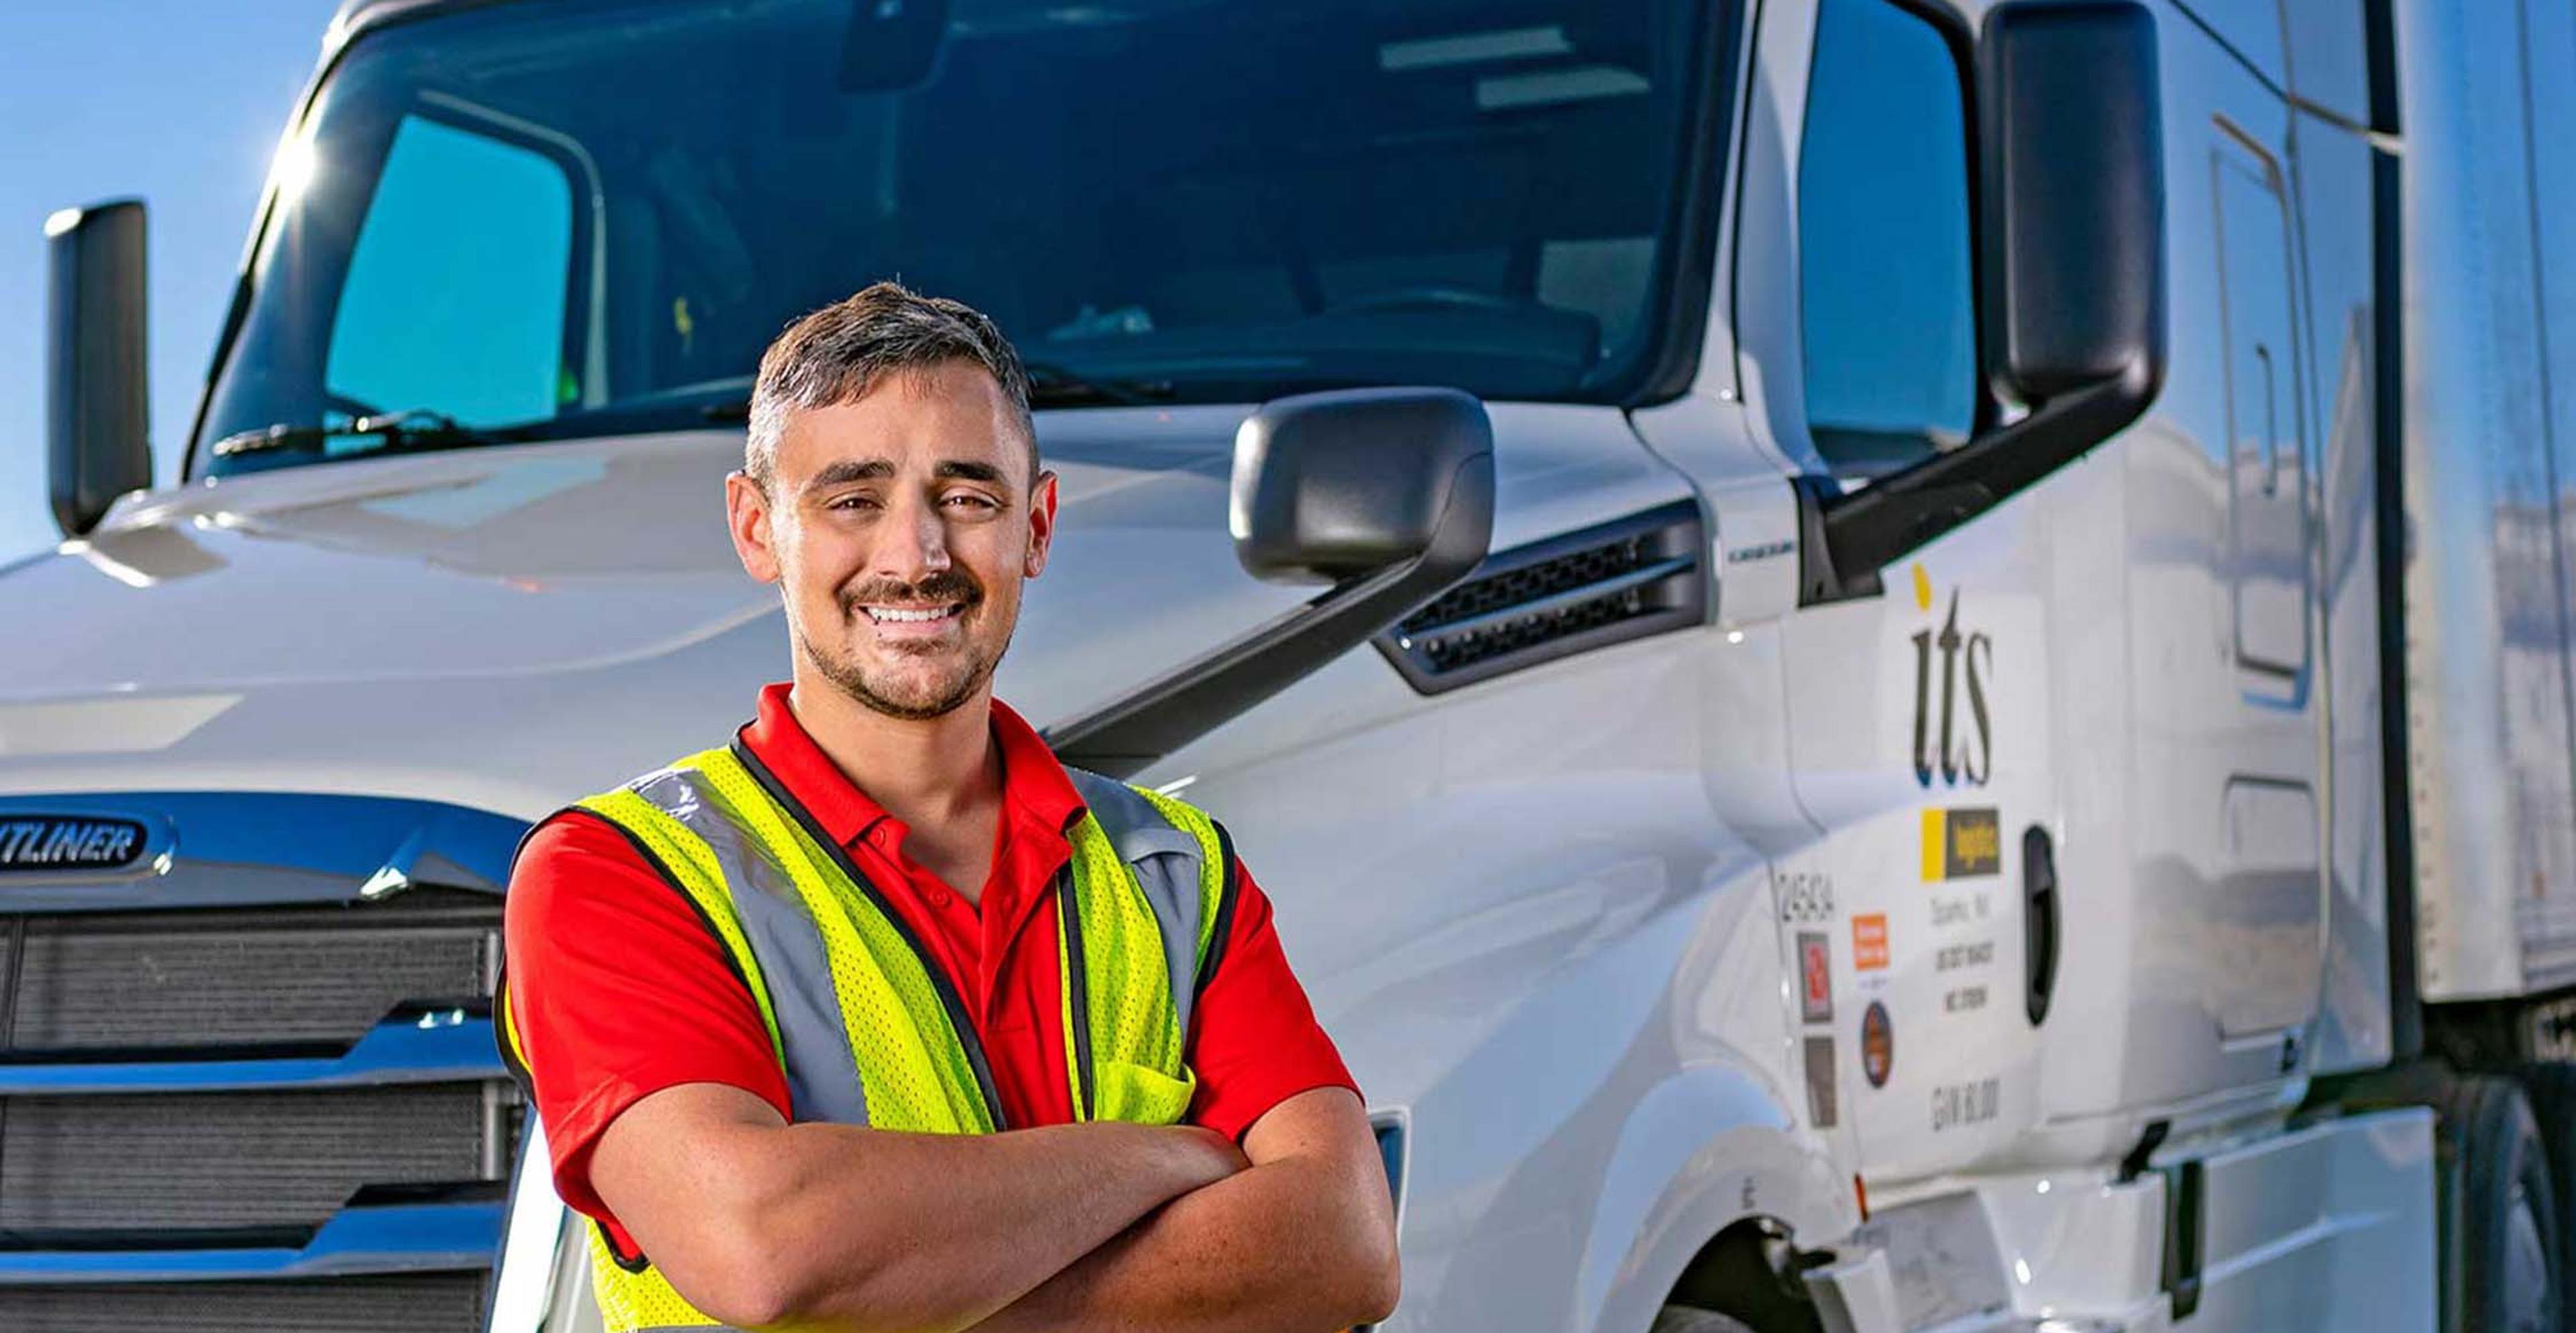 8 Great Reasons to Consider a Career as a Truck Driver 